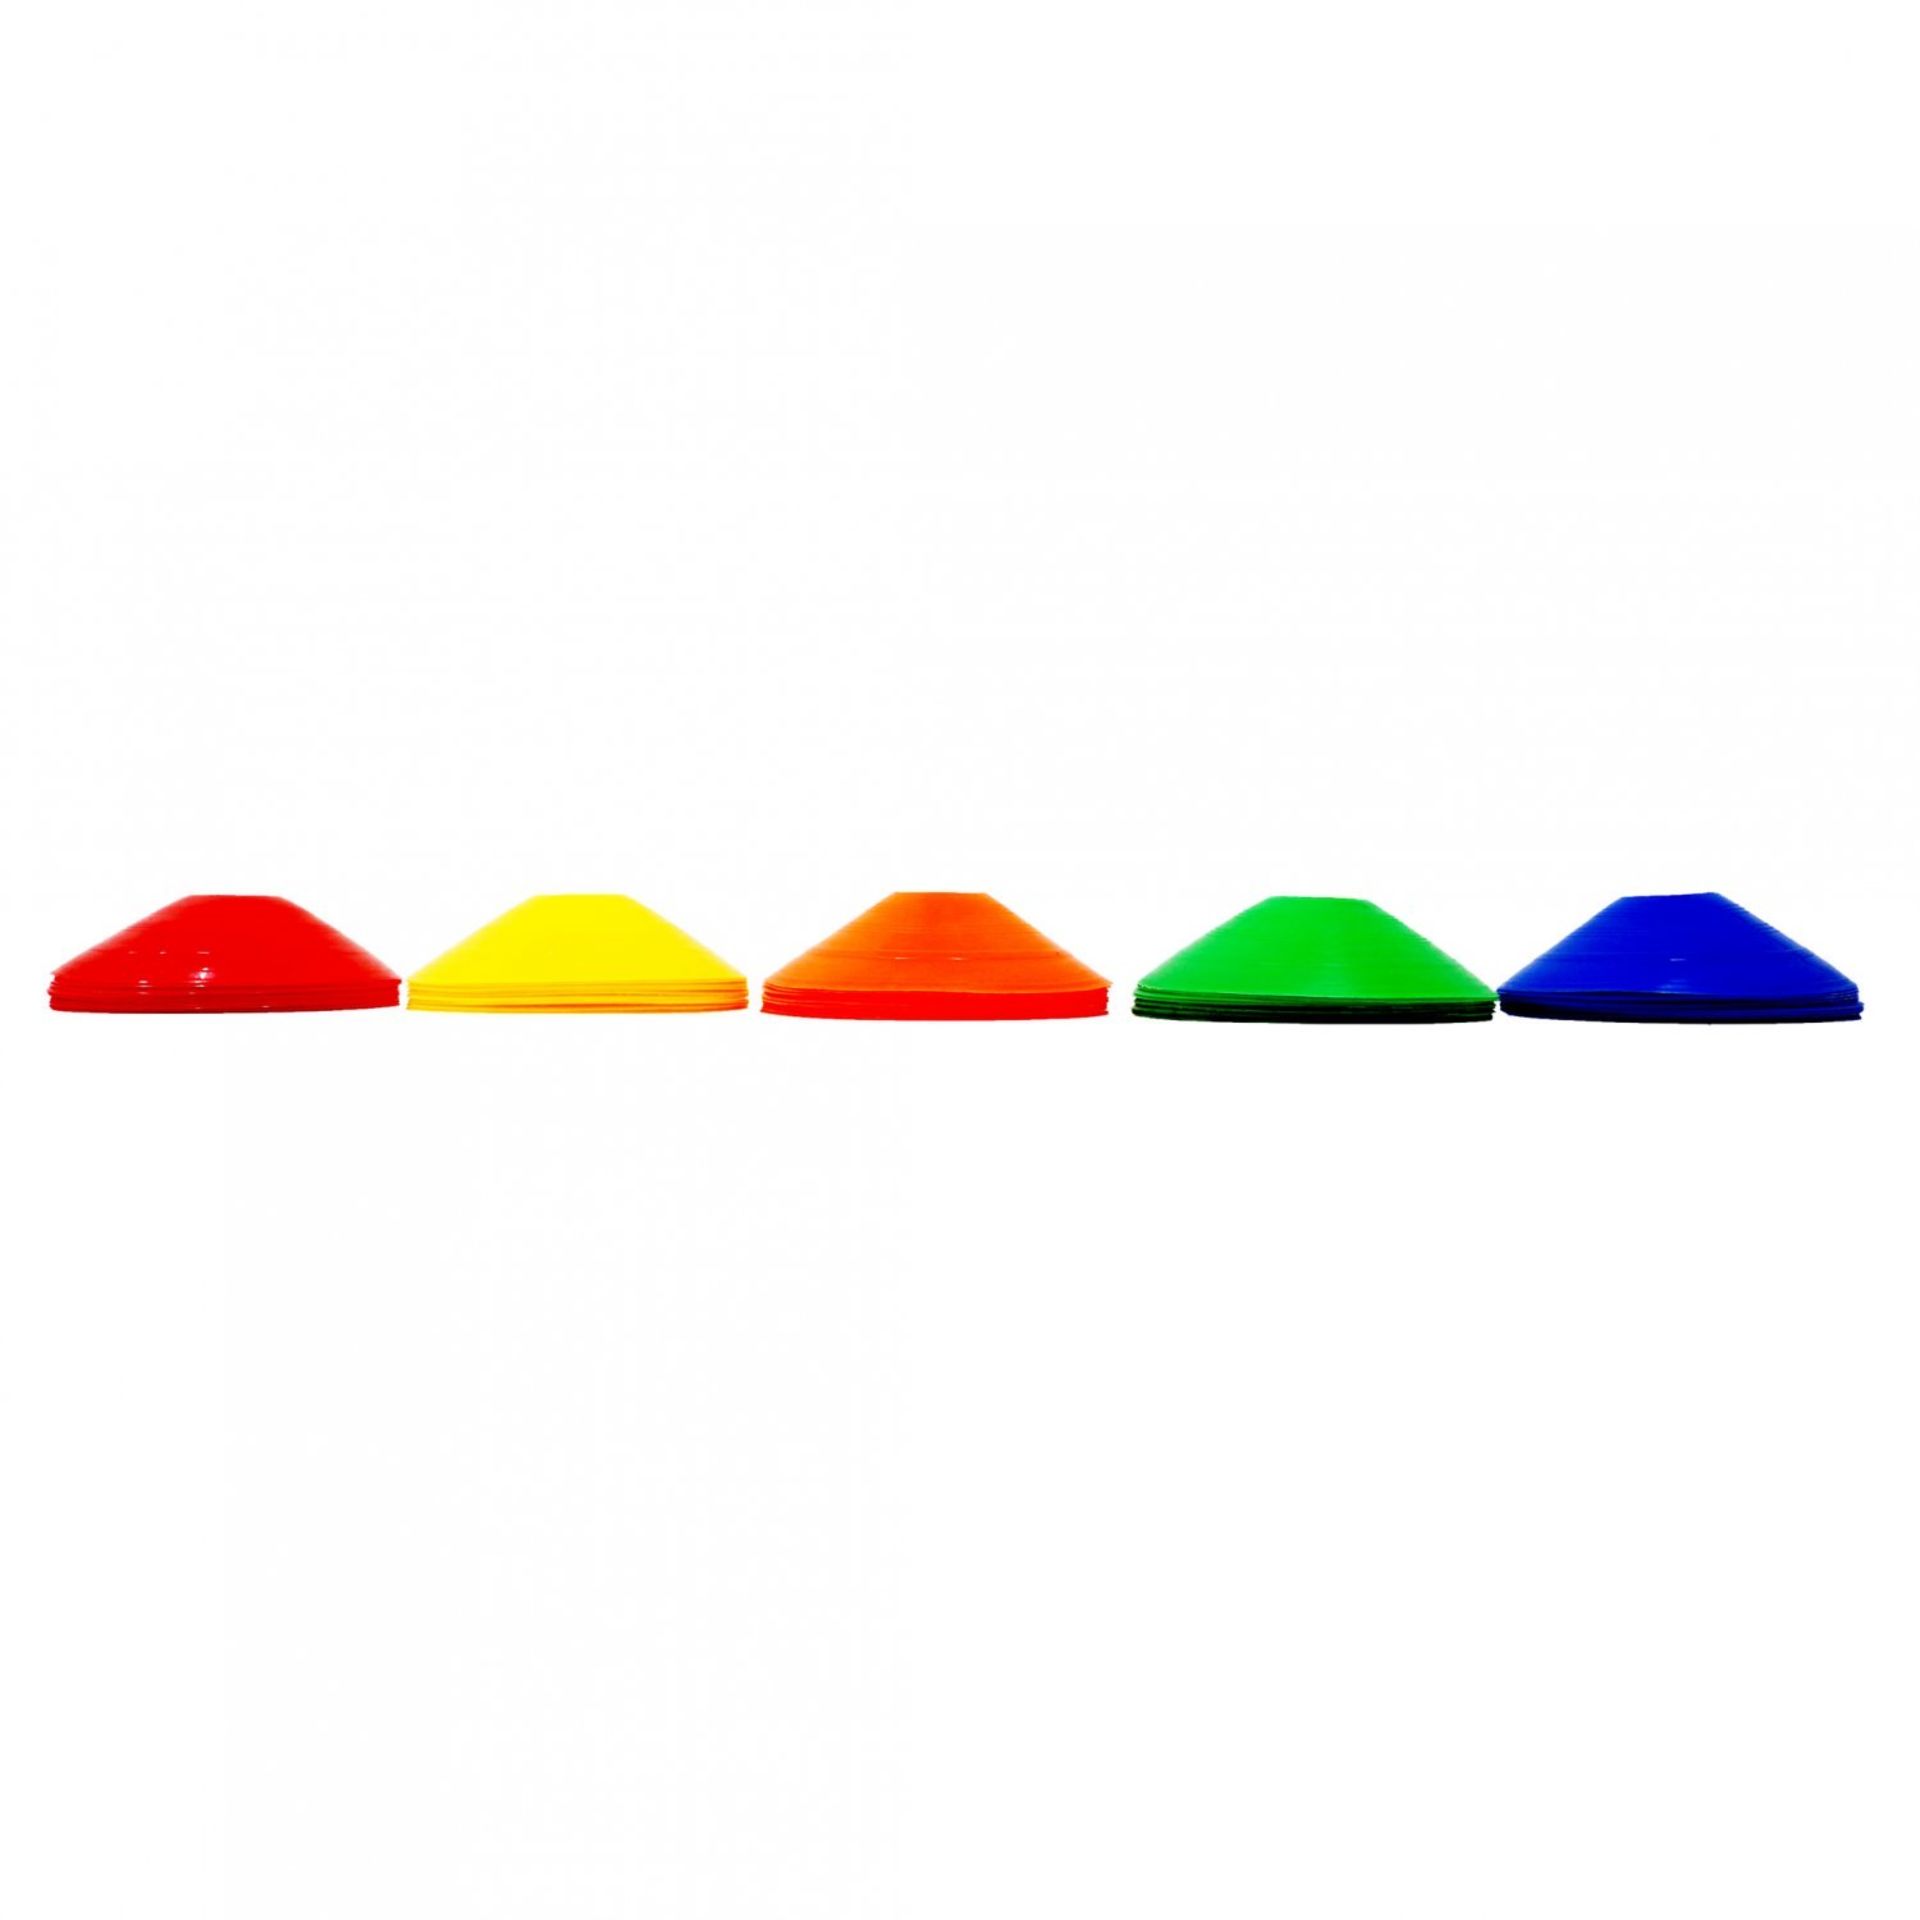 (SP491) 50x Multi Coloured Sports Training Markers Discs Cones w/ Stand This set of 50 train... - Image 2 of 2